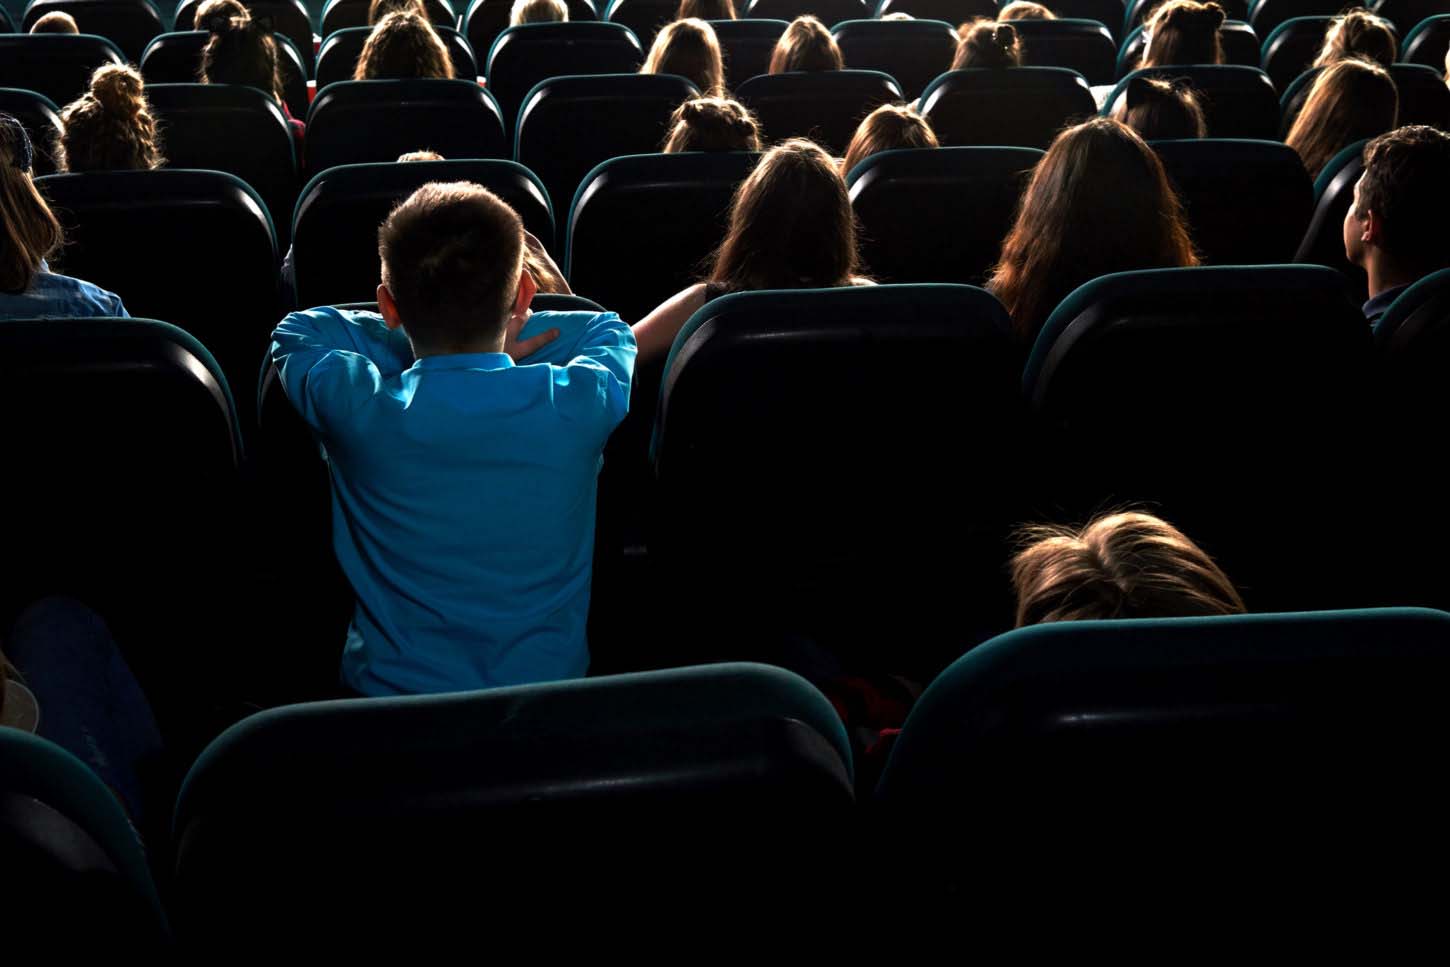 Rearview shot of little kids watching movies at the cinema sitting in the dark auditorium leisure hobby entertainment kids childhood modern multiplex activity lifestyle holidays concept.